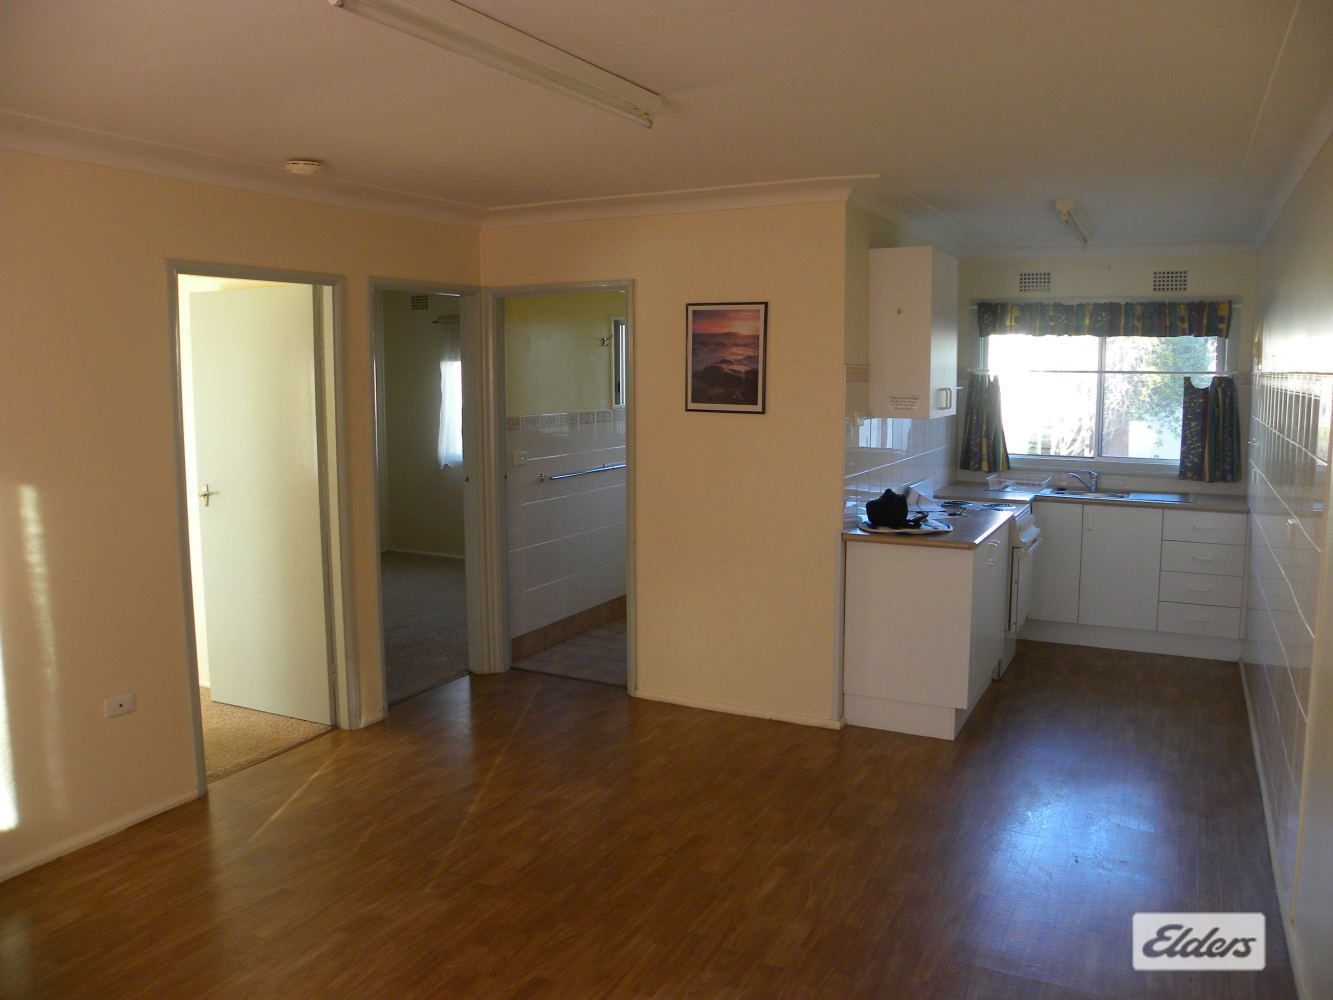 2 bedrooms Apartment / Unit / Flat in 5/44-46 Golf Links Drive BATEMANS BAY NSW, 2536